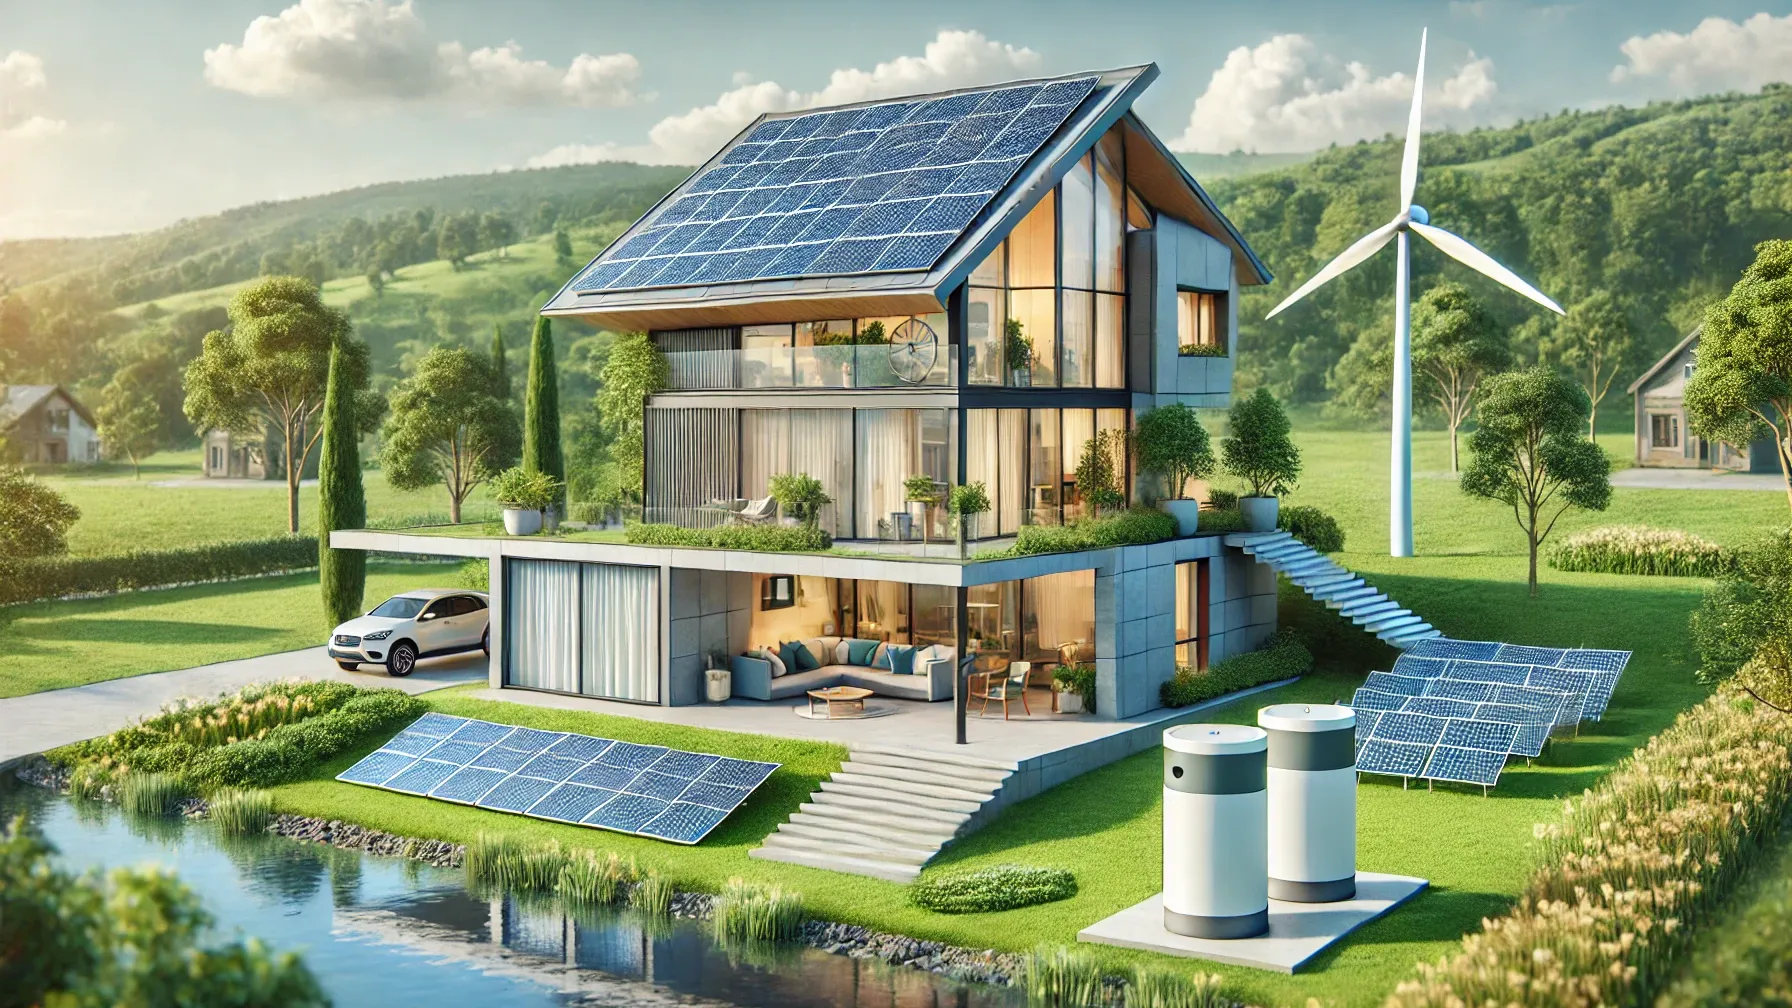 A futuristic net-zero home with solar panels on the roof